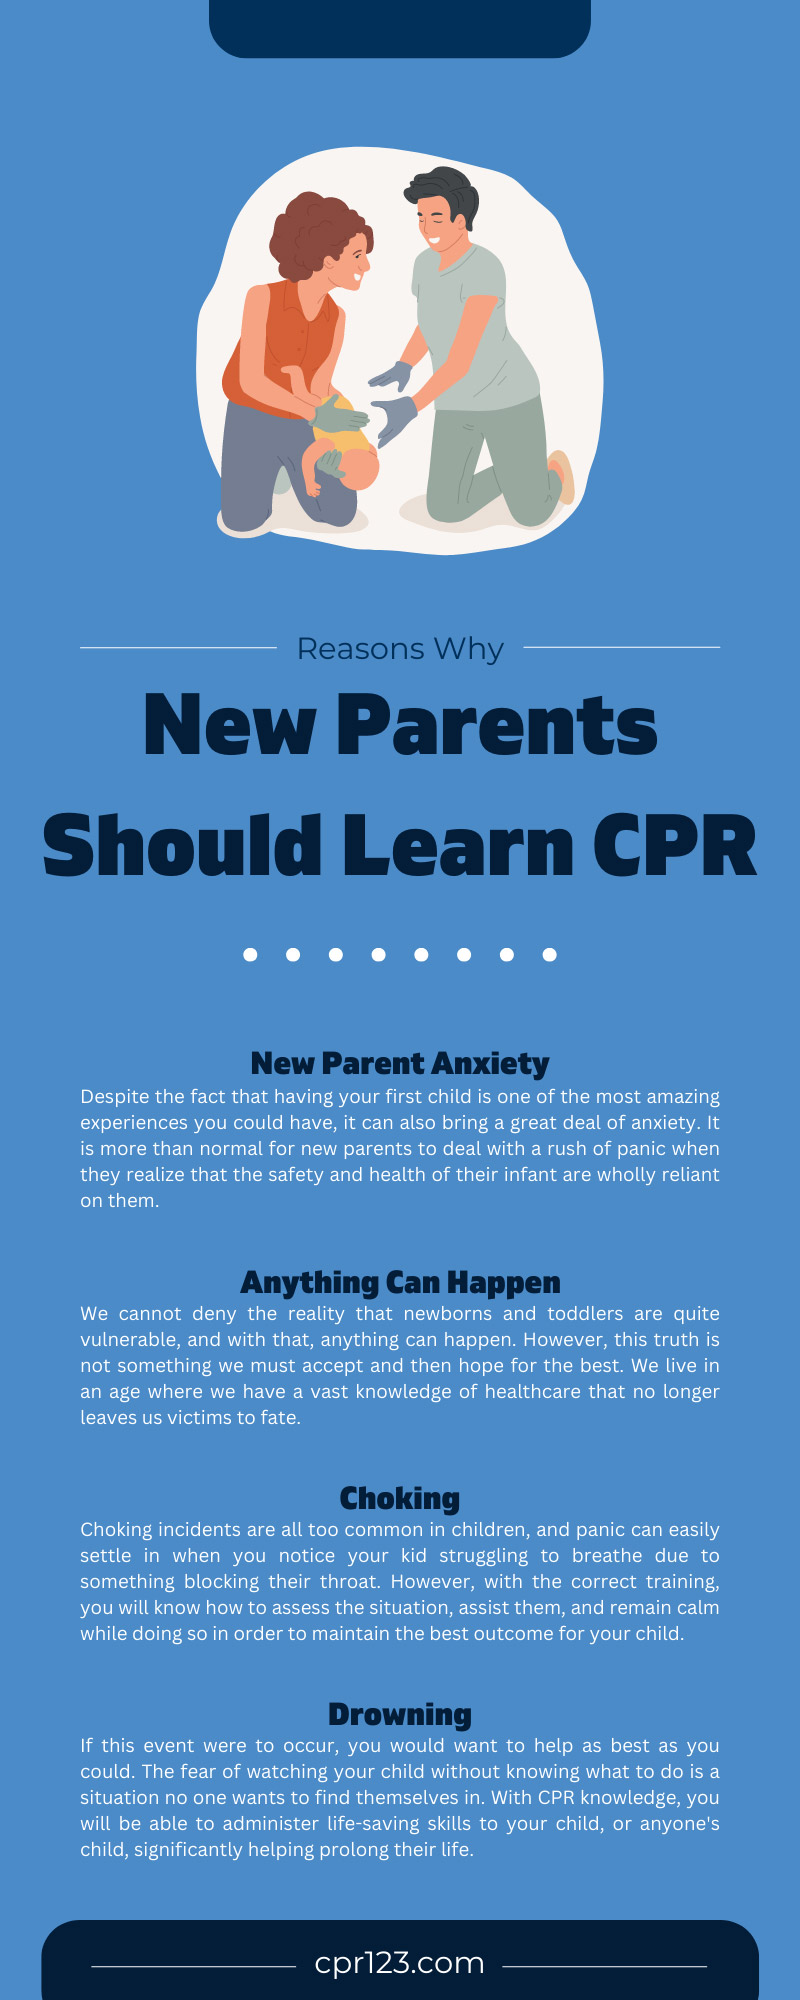 Reasons Why New Parents Should Learn CPR